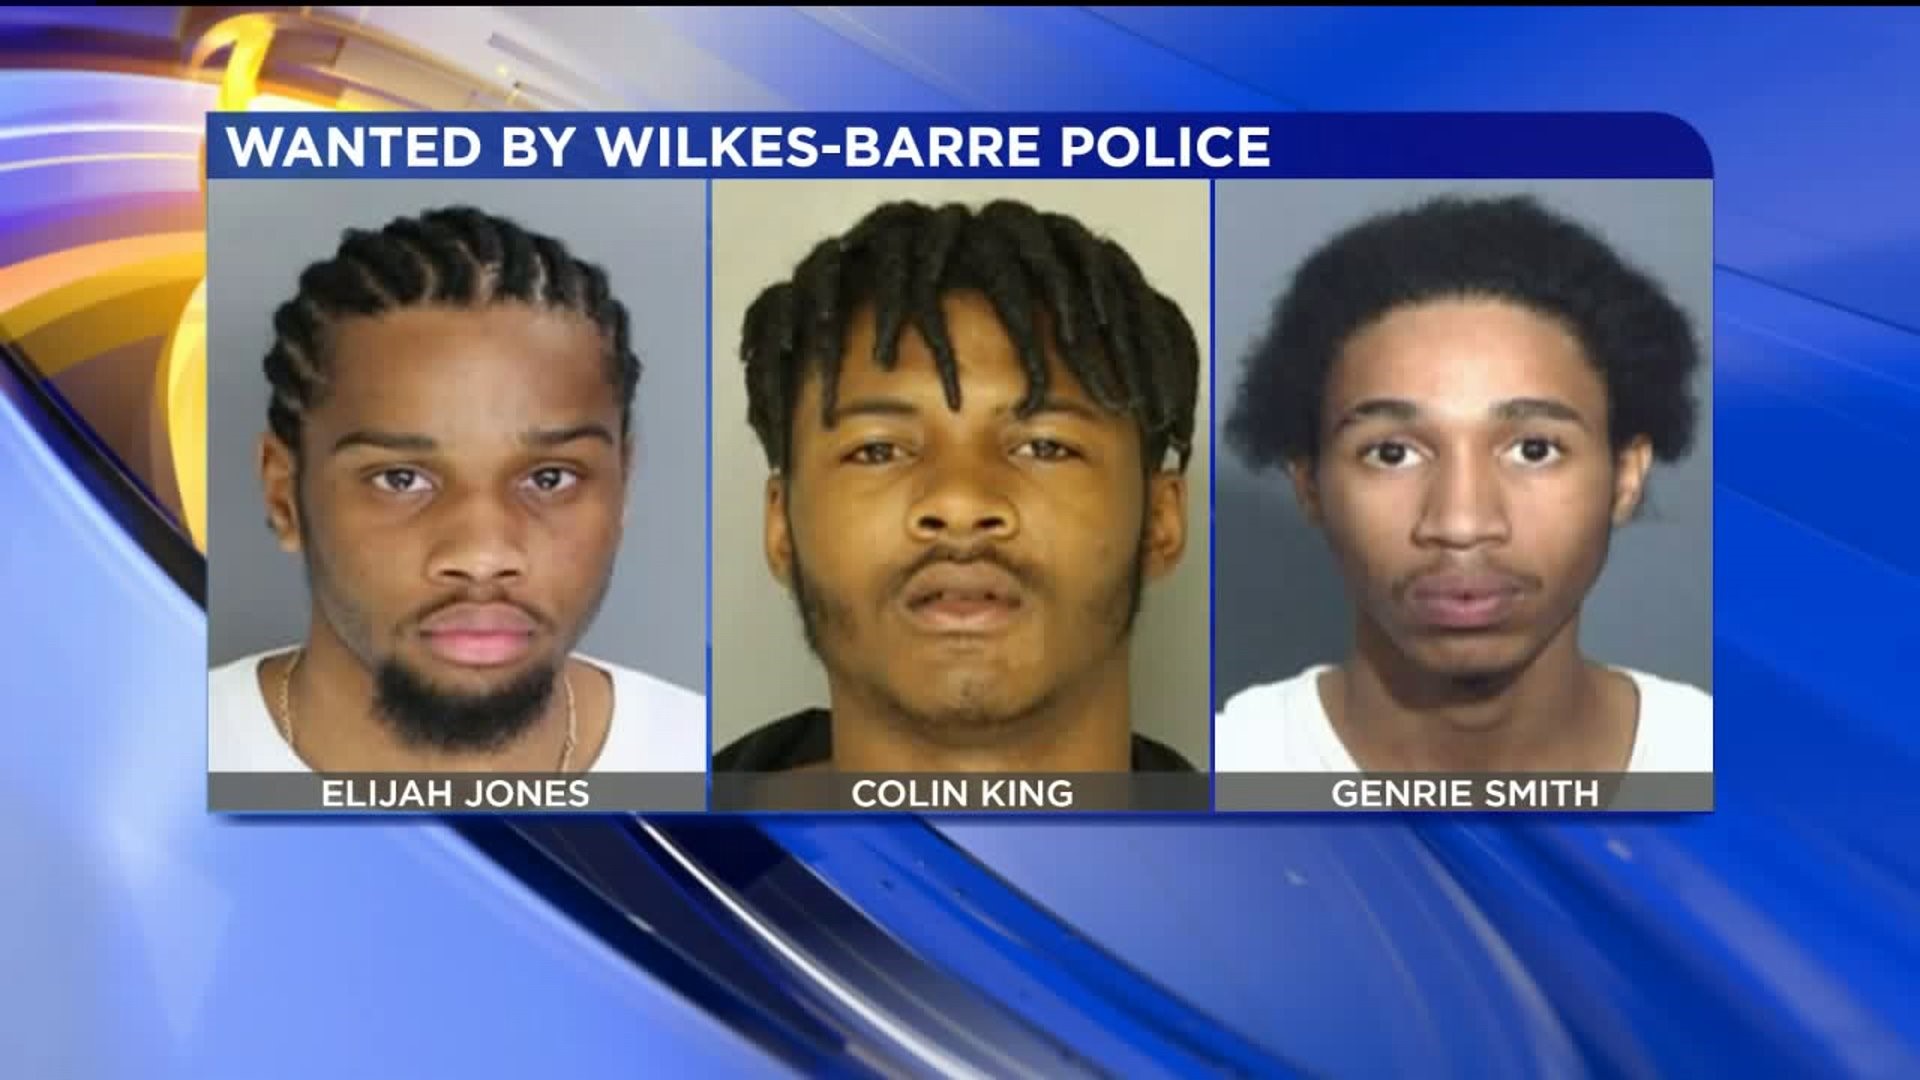 'I hope they find them' - Looking for Answers to Violence in Wilkes-Barre